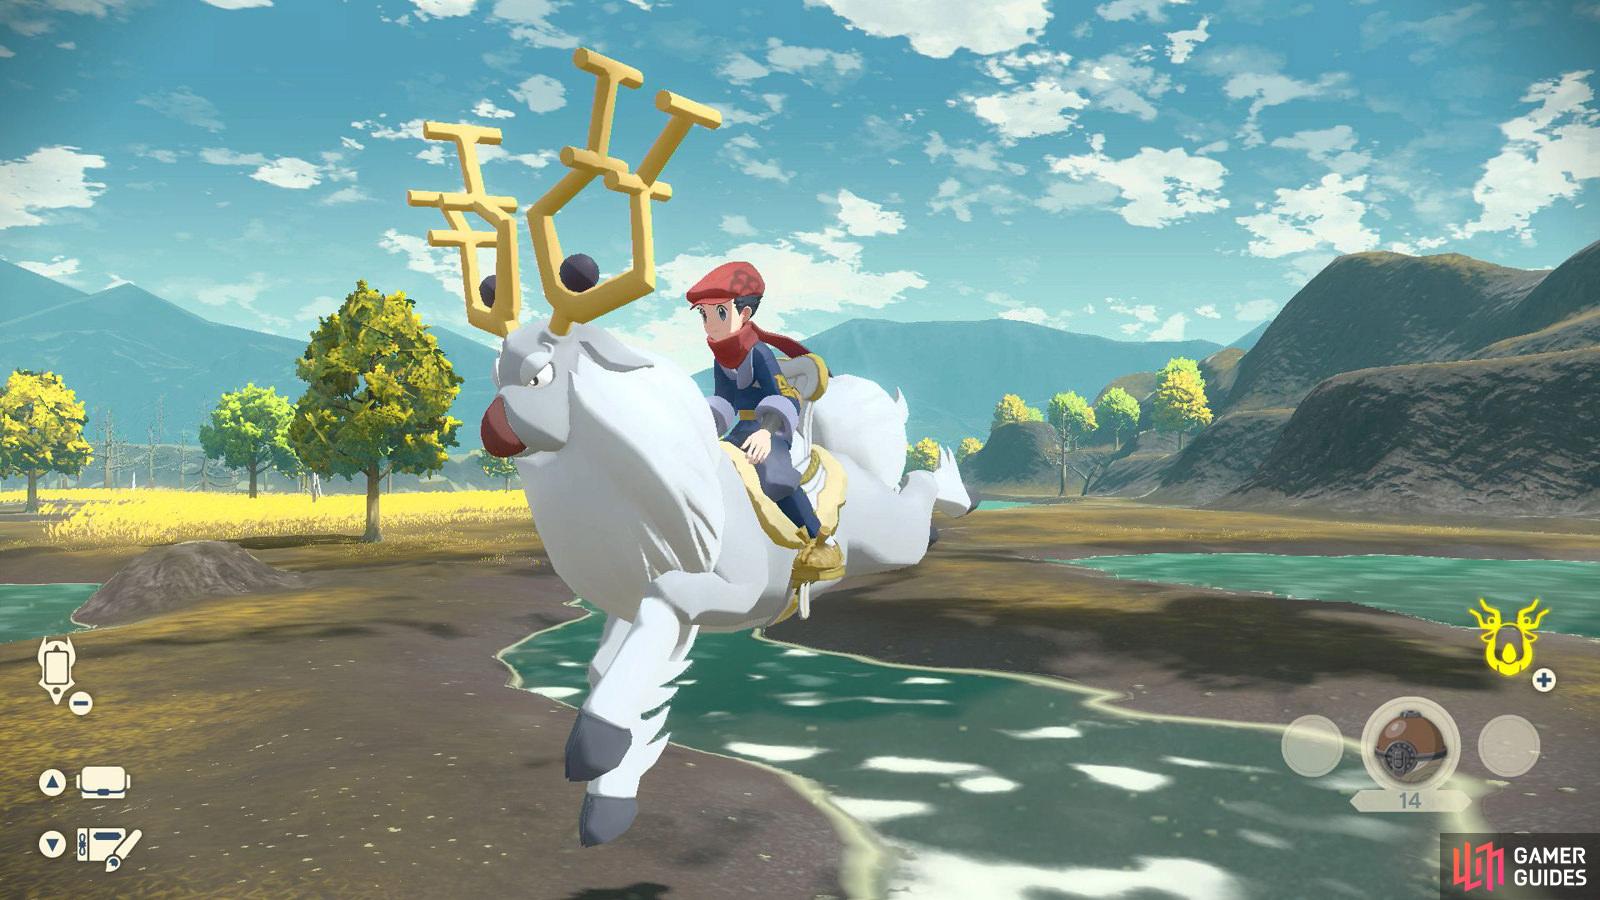 Or gallop across the land on the back of a Wyrdeer (All images credited to The Pokémon Company).